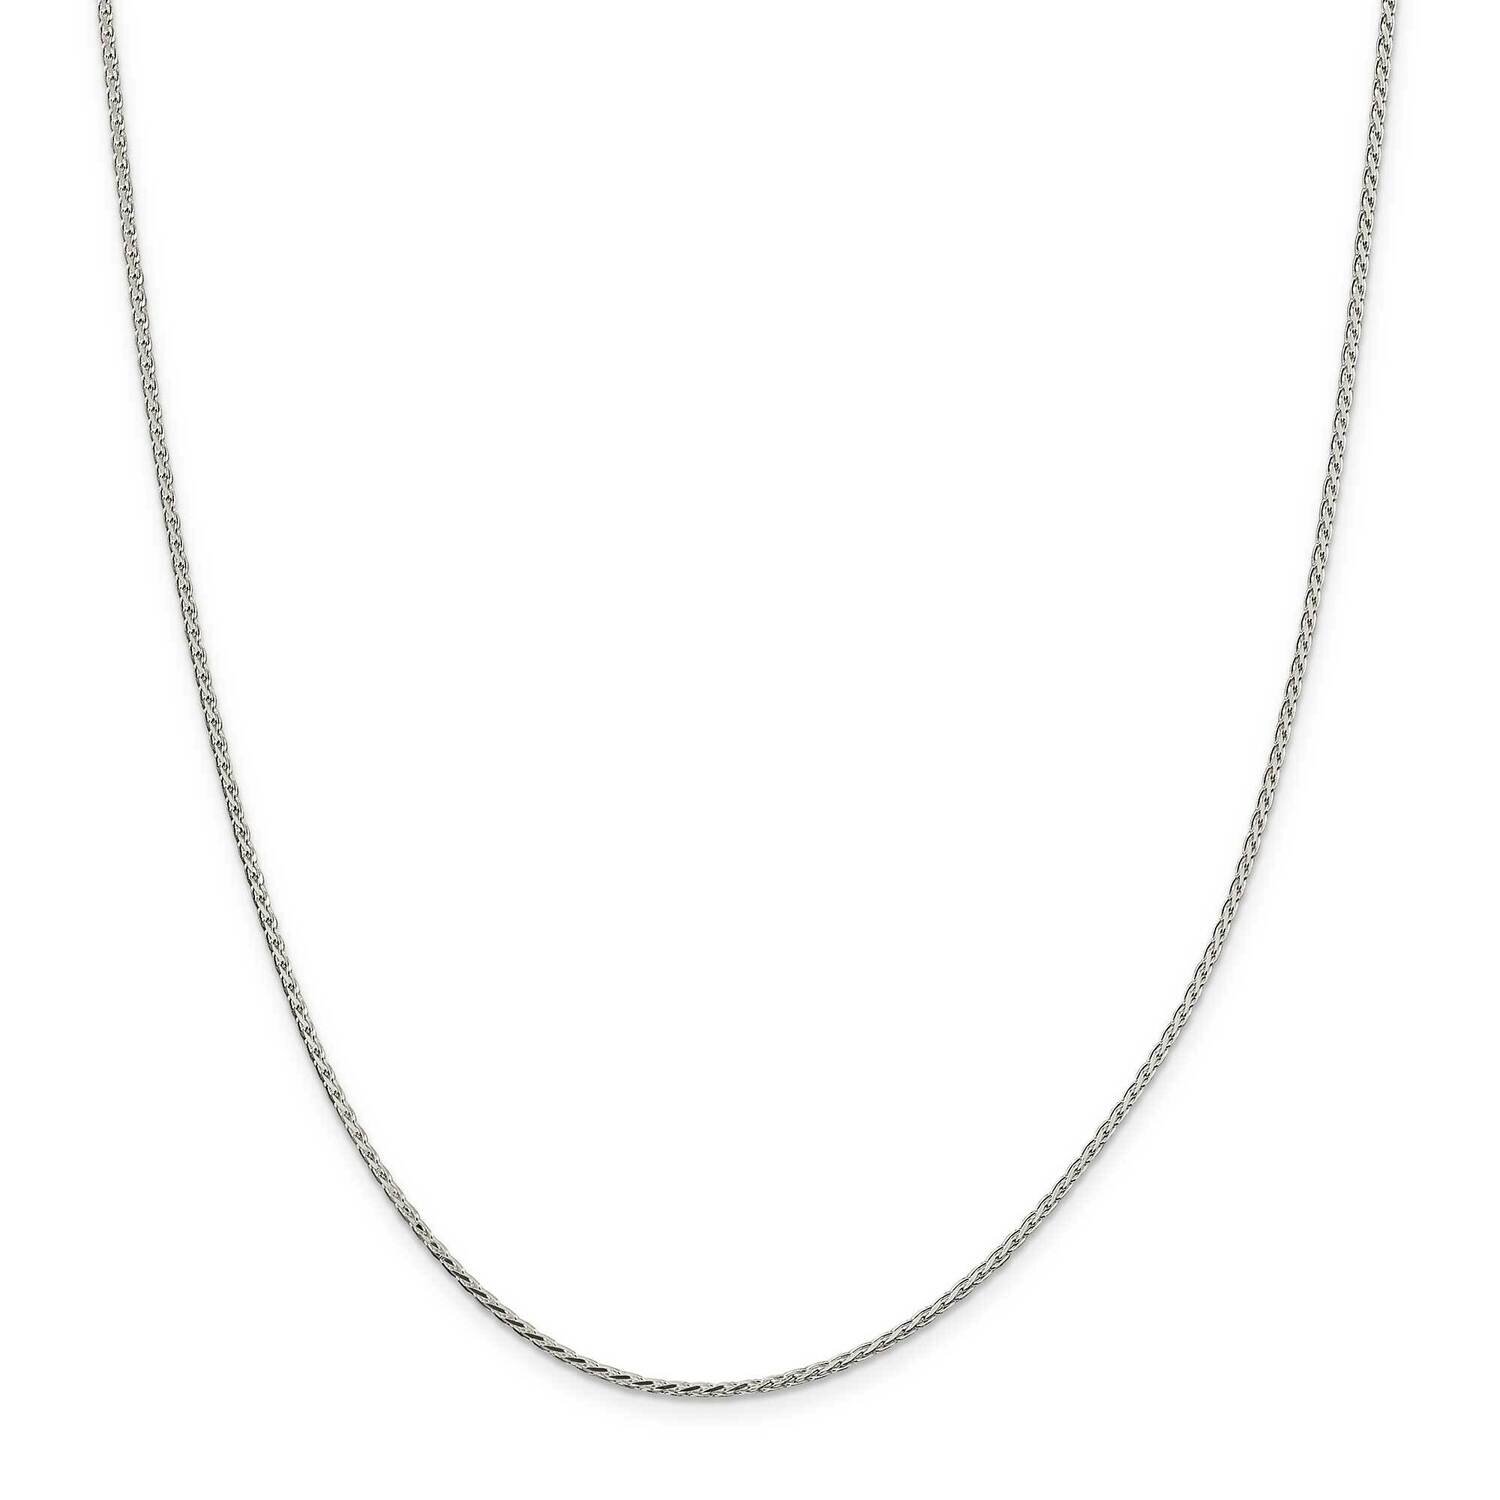 1.7mm Diamond-Cut Round Spiga Chain with 2 Inch Extender 18 Inch Sterling Silver QSR050E-18